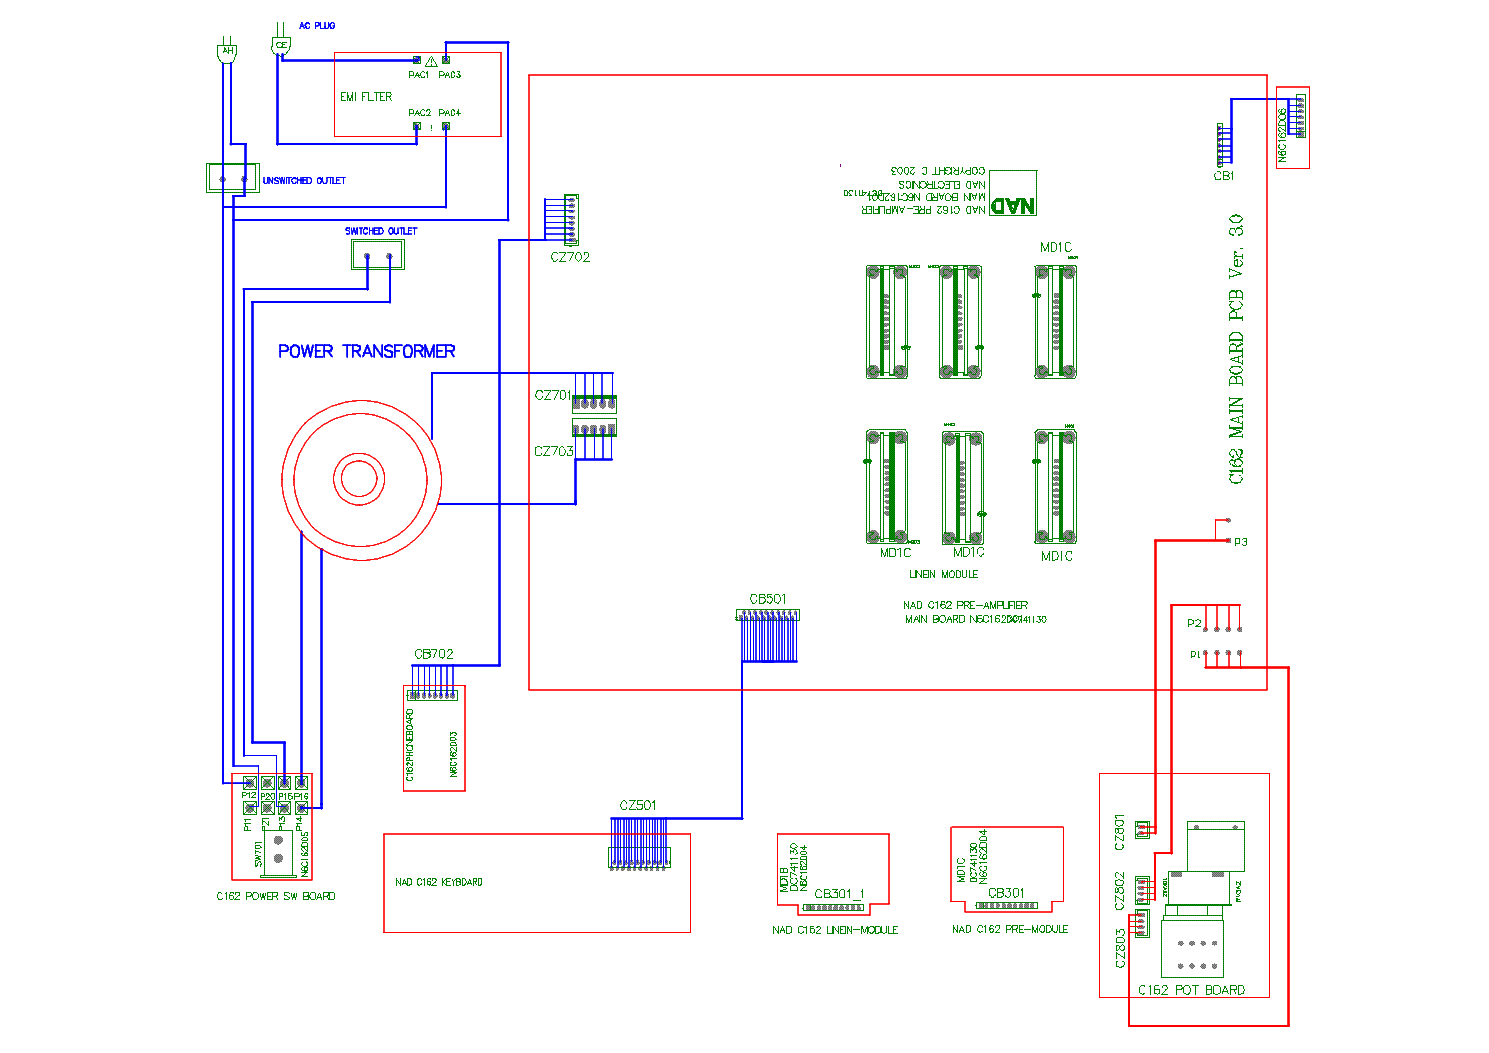 NAD C162 PREAMPLIFIER SM service manual (2nd page)